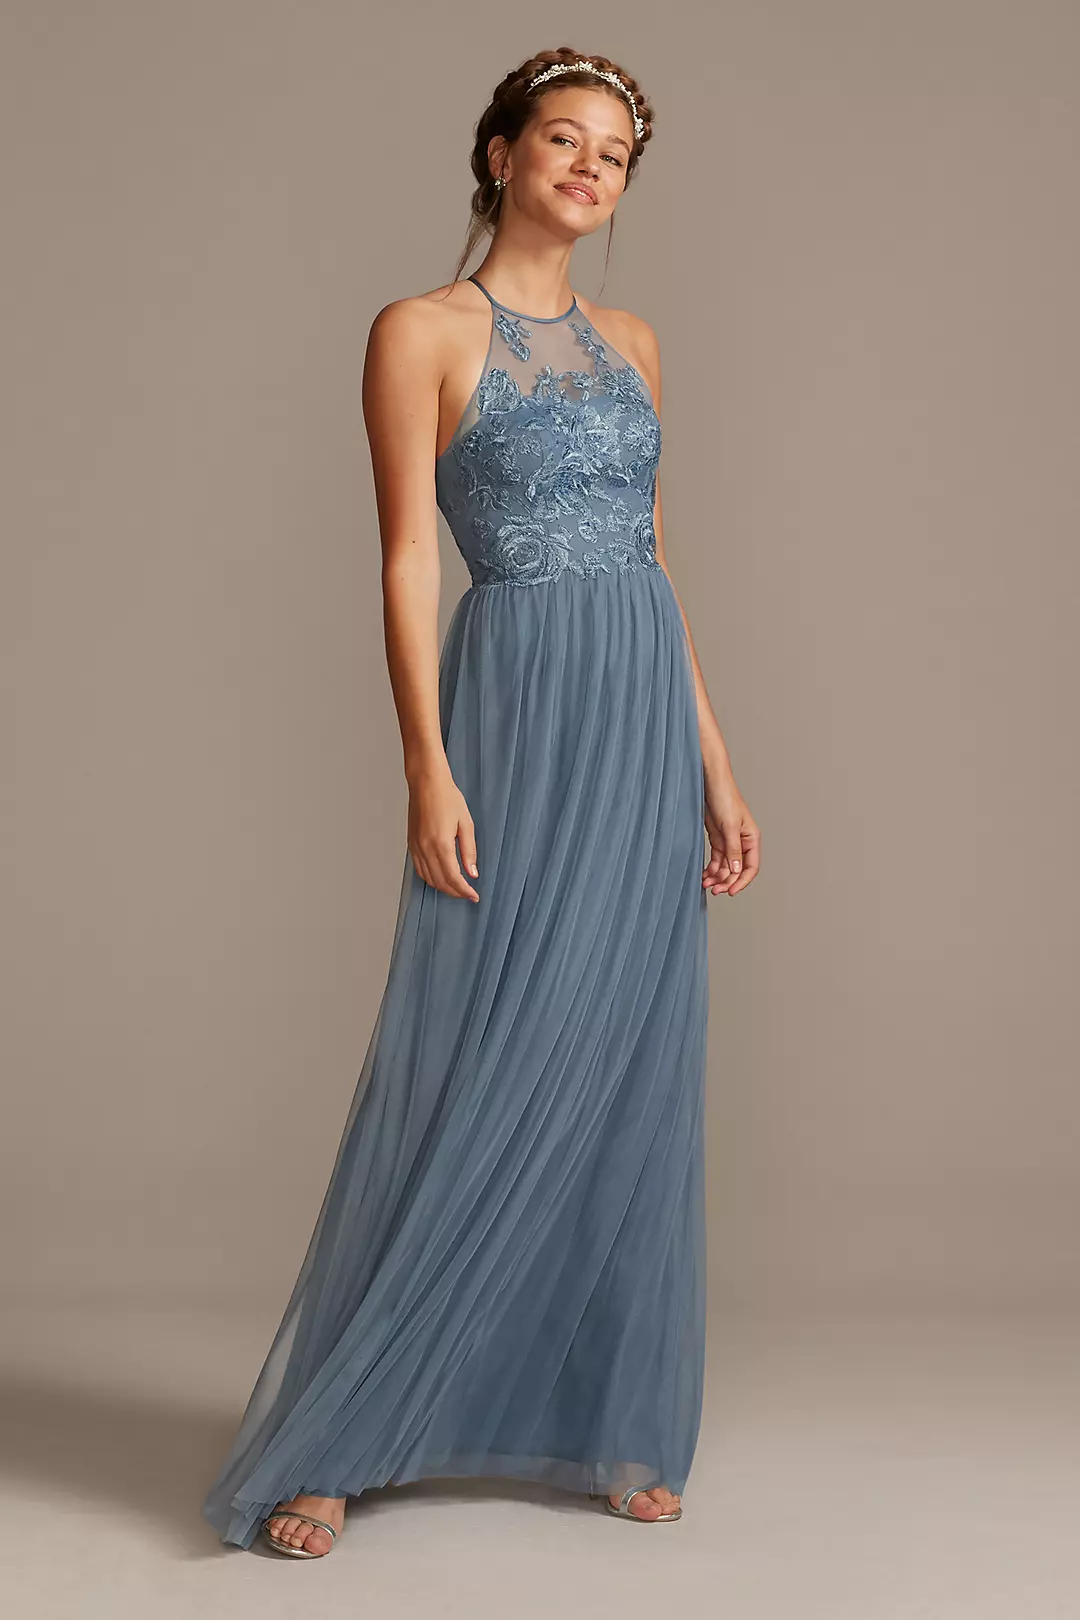 High-Neck Embroidered Soft Net Bridesmaid Dress Image